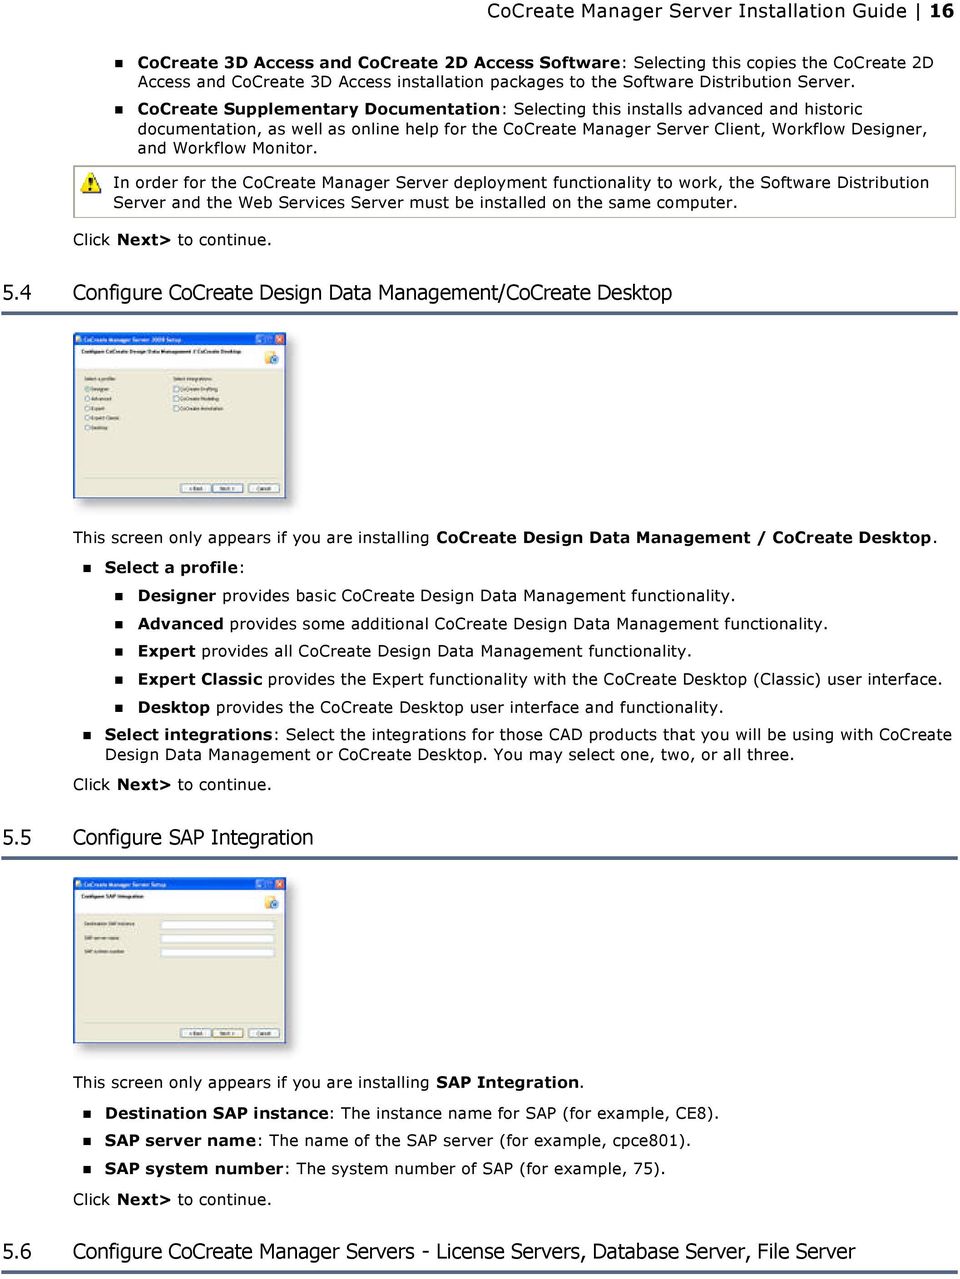 CoCreate Supplementary Documentation: Selecting this installs advanced and historic documentation, as well as online help for the CoCreate Manager Server Client, Workflow Designer, and Workflow